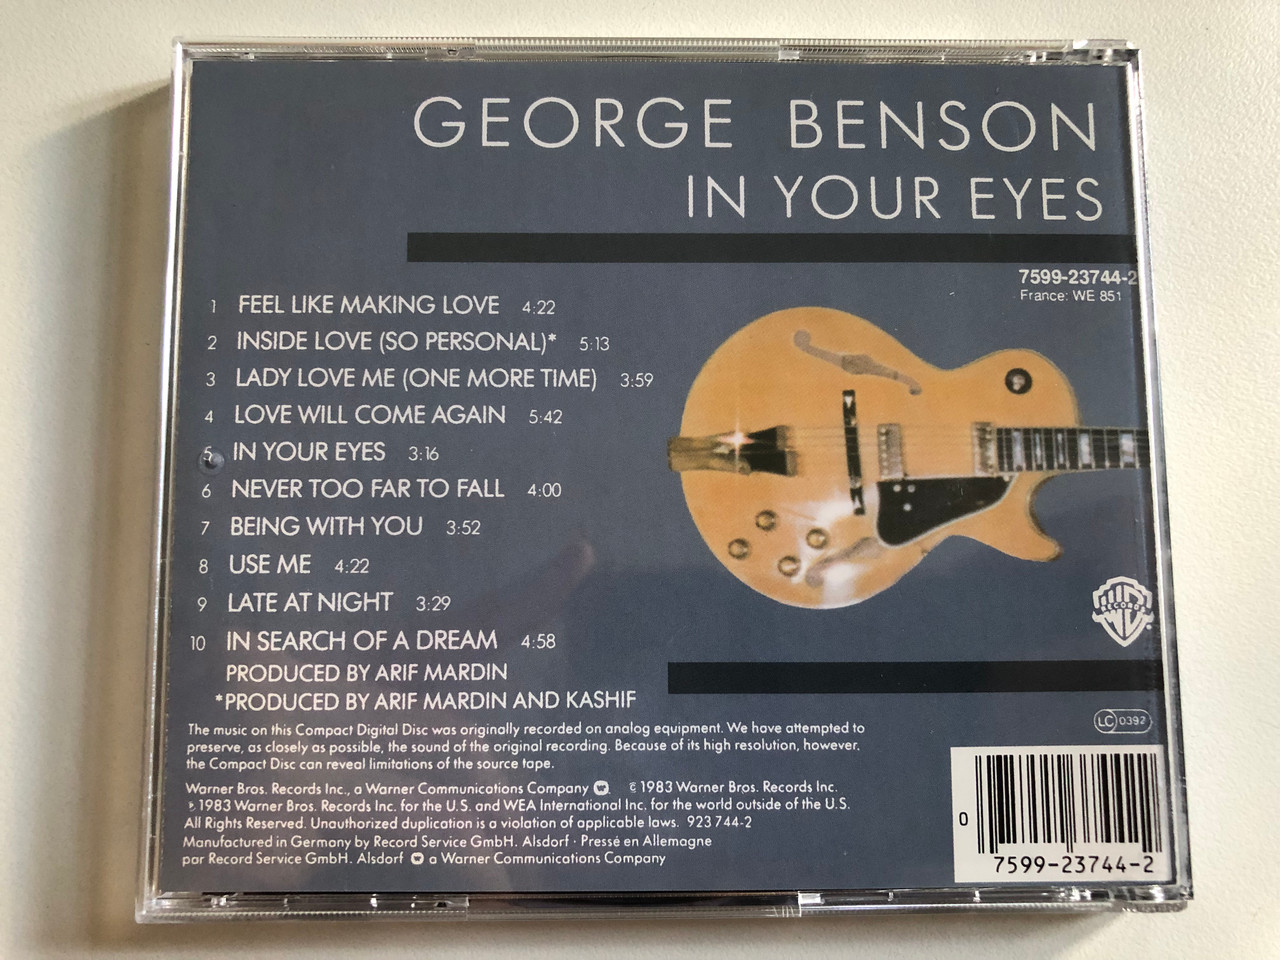 https://cdn10.bigcommerce.com/s-62bdpkt7pb/products/0/images/313488/George_Benson_In_Your_Eyes_Warner_Bros._Records_Audio_CD_7599-23744-2_2__35792.1700844364.1280.1280.JPG?c=2